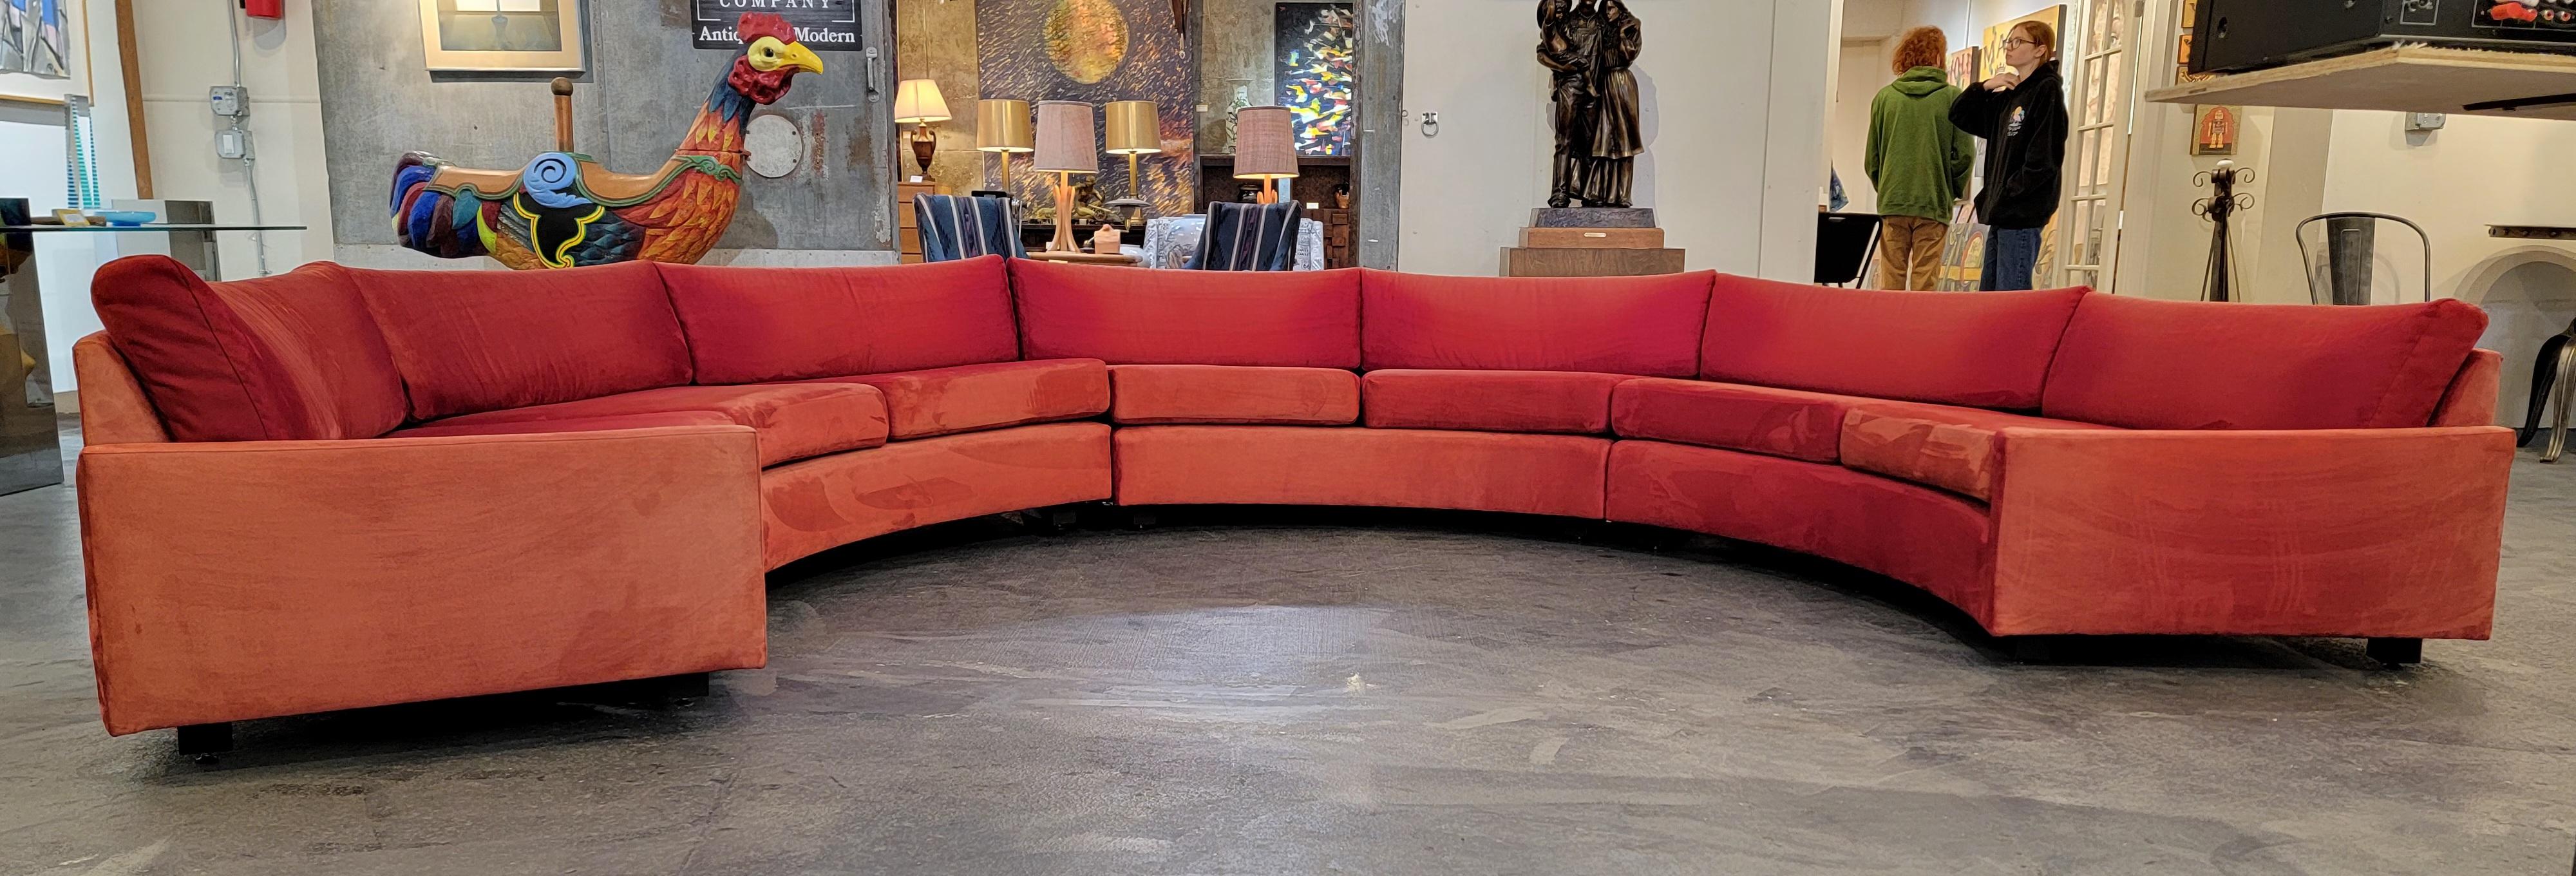 Exceptional circular sectional sofa designed by Milo Baughman for Thayer Coggin, circa 1970s. A room defining piece with amazing presence. Past re-upholstery in a velvet fabric showing minor imperfections and fade to fabric. All cushions soft and